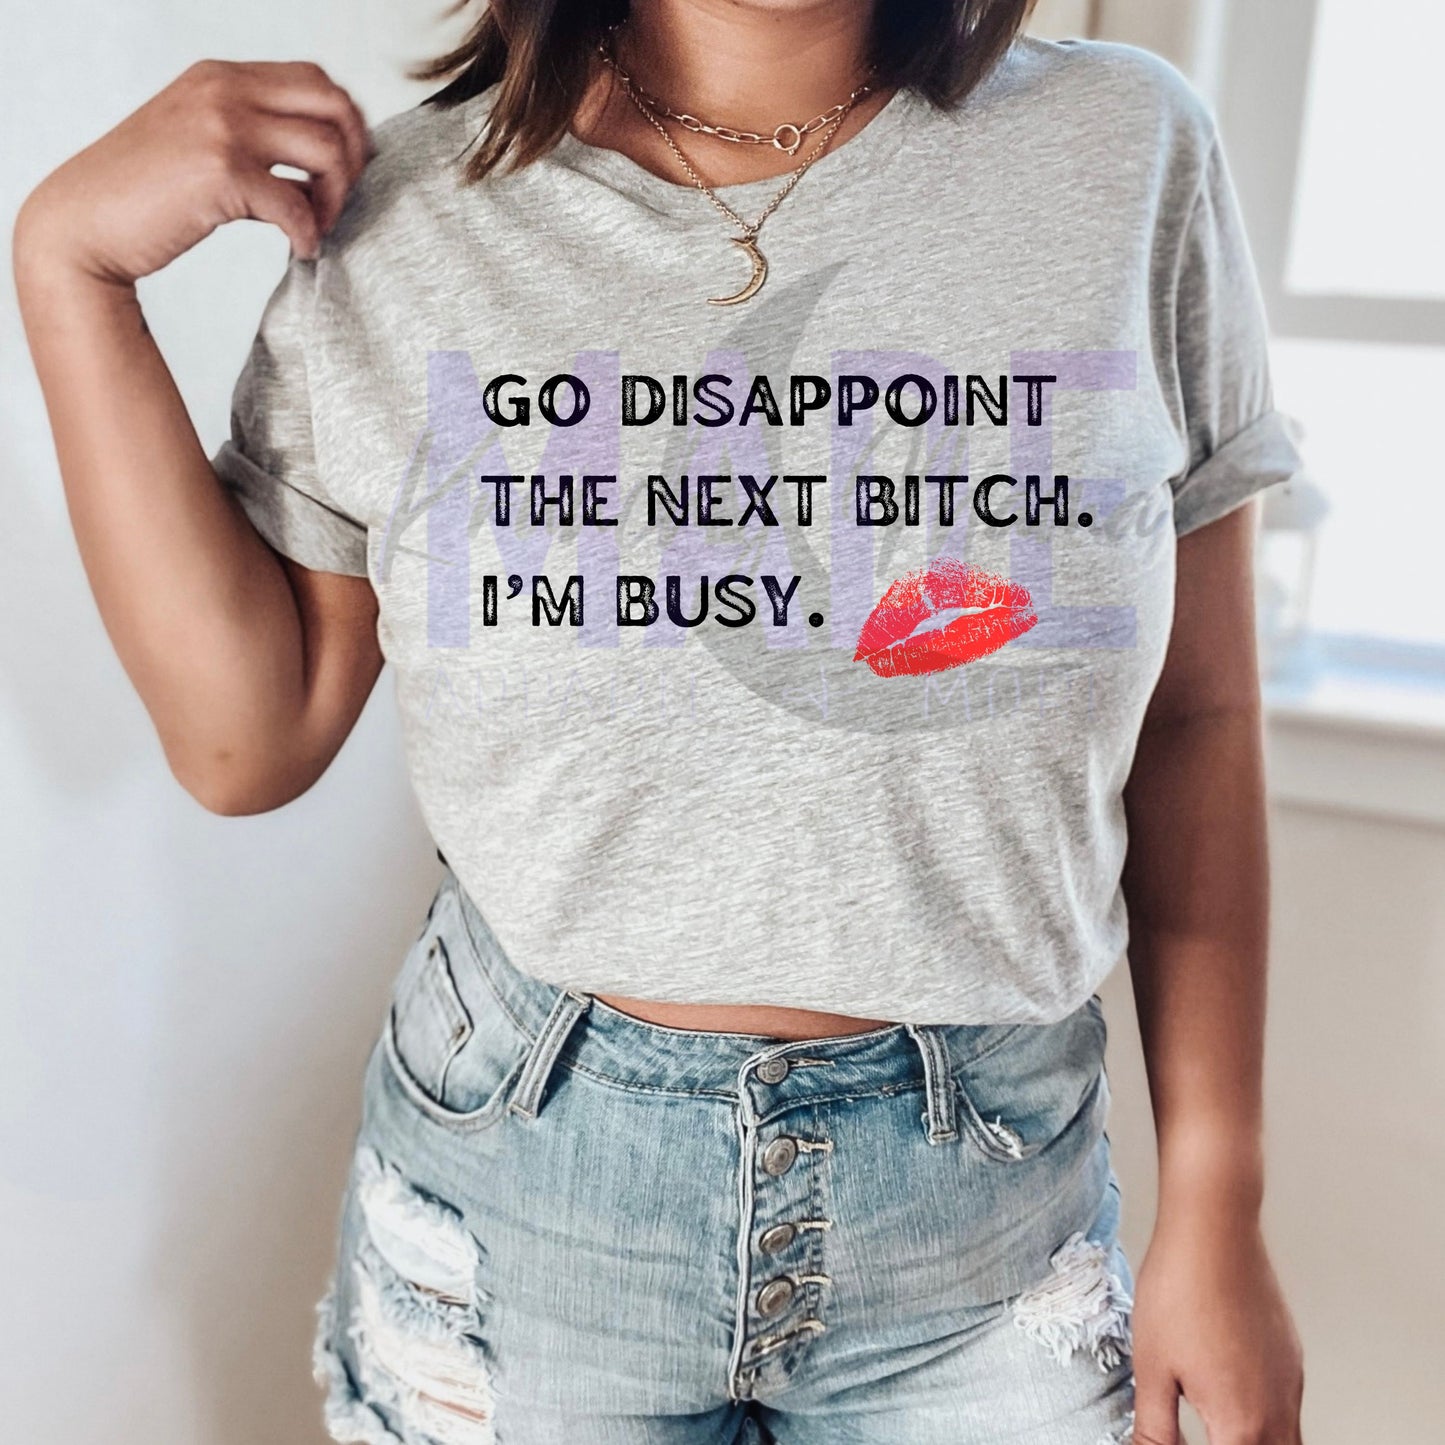 Go Disappoint The Next Bitch. I'm Busy. 💋